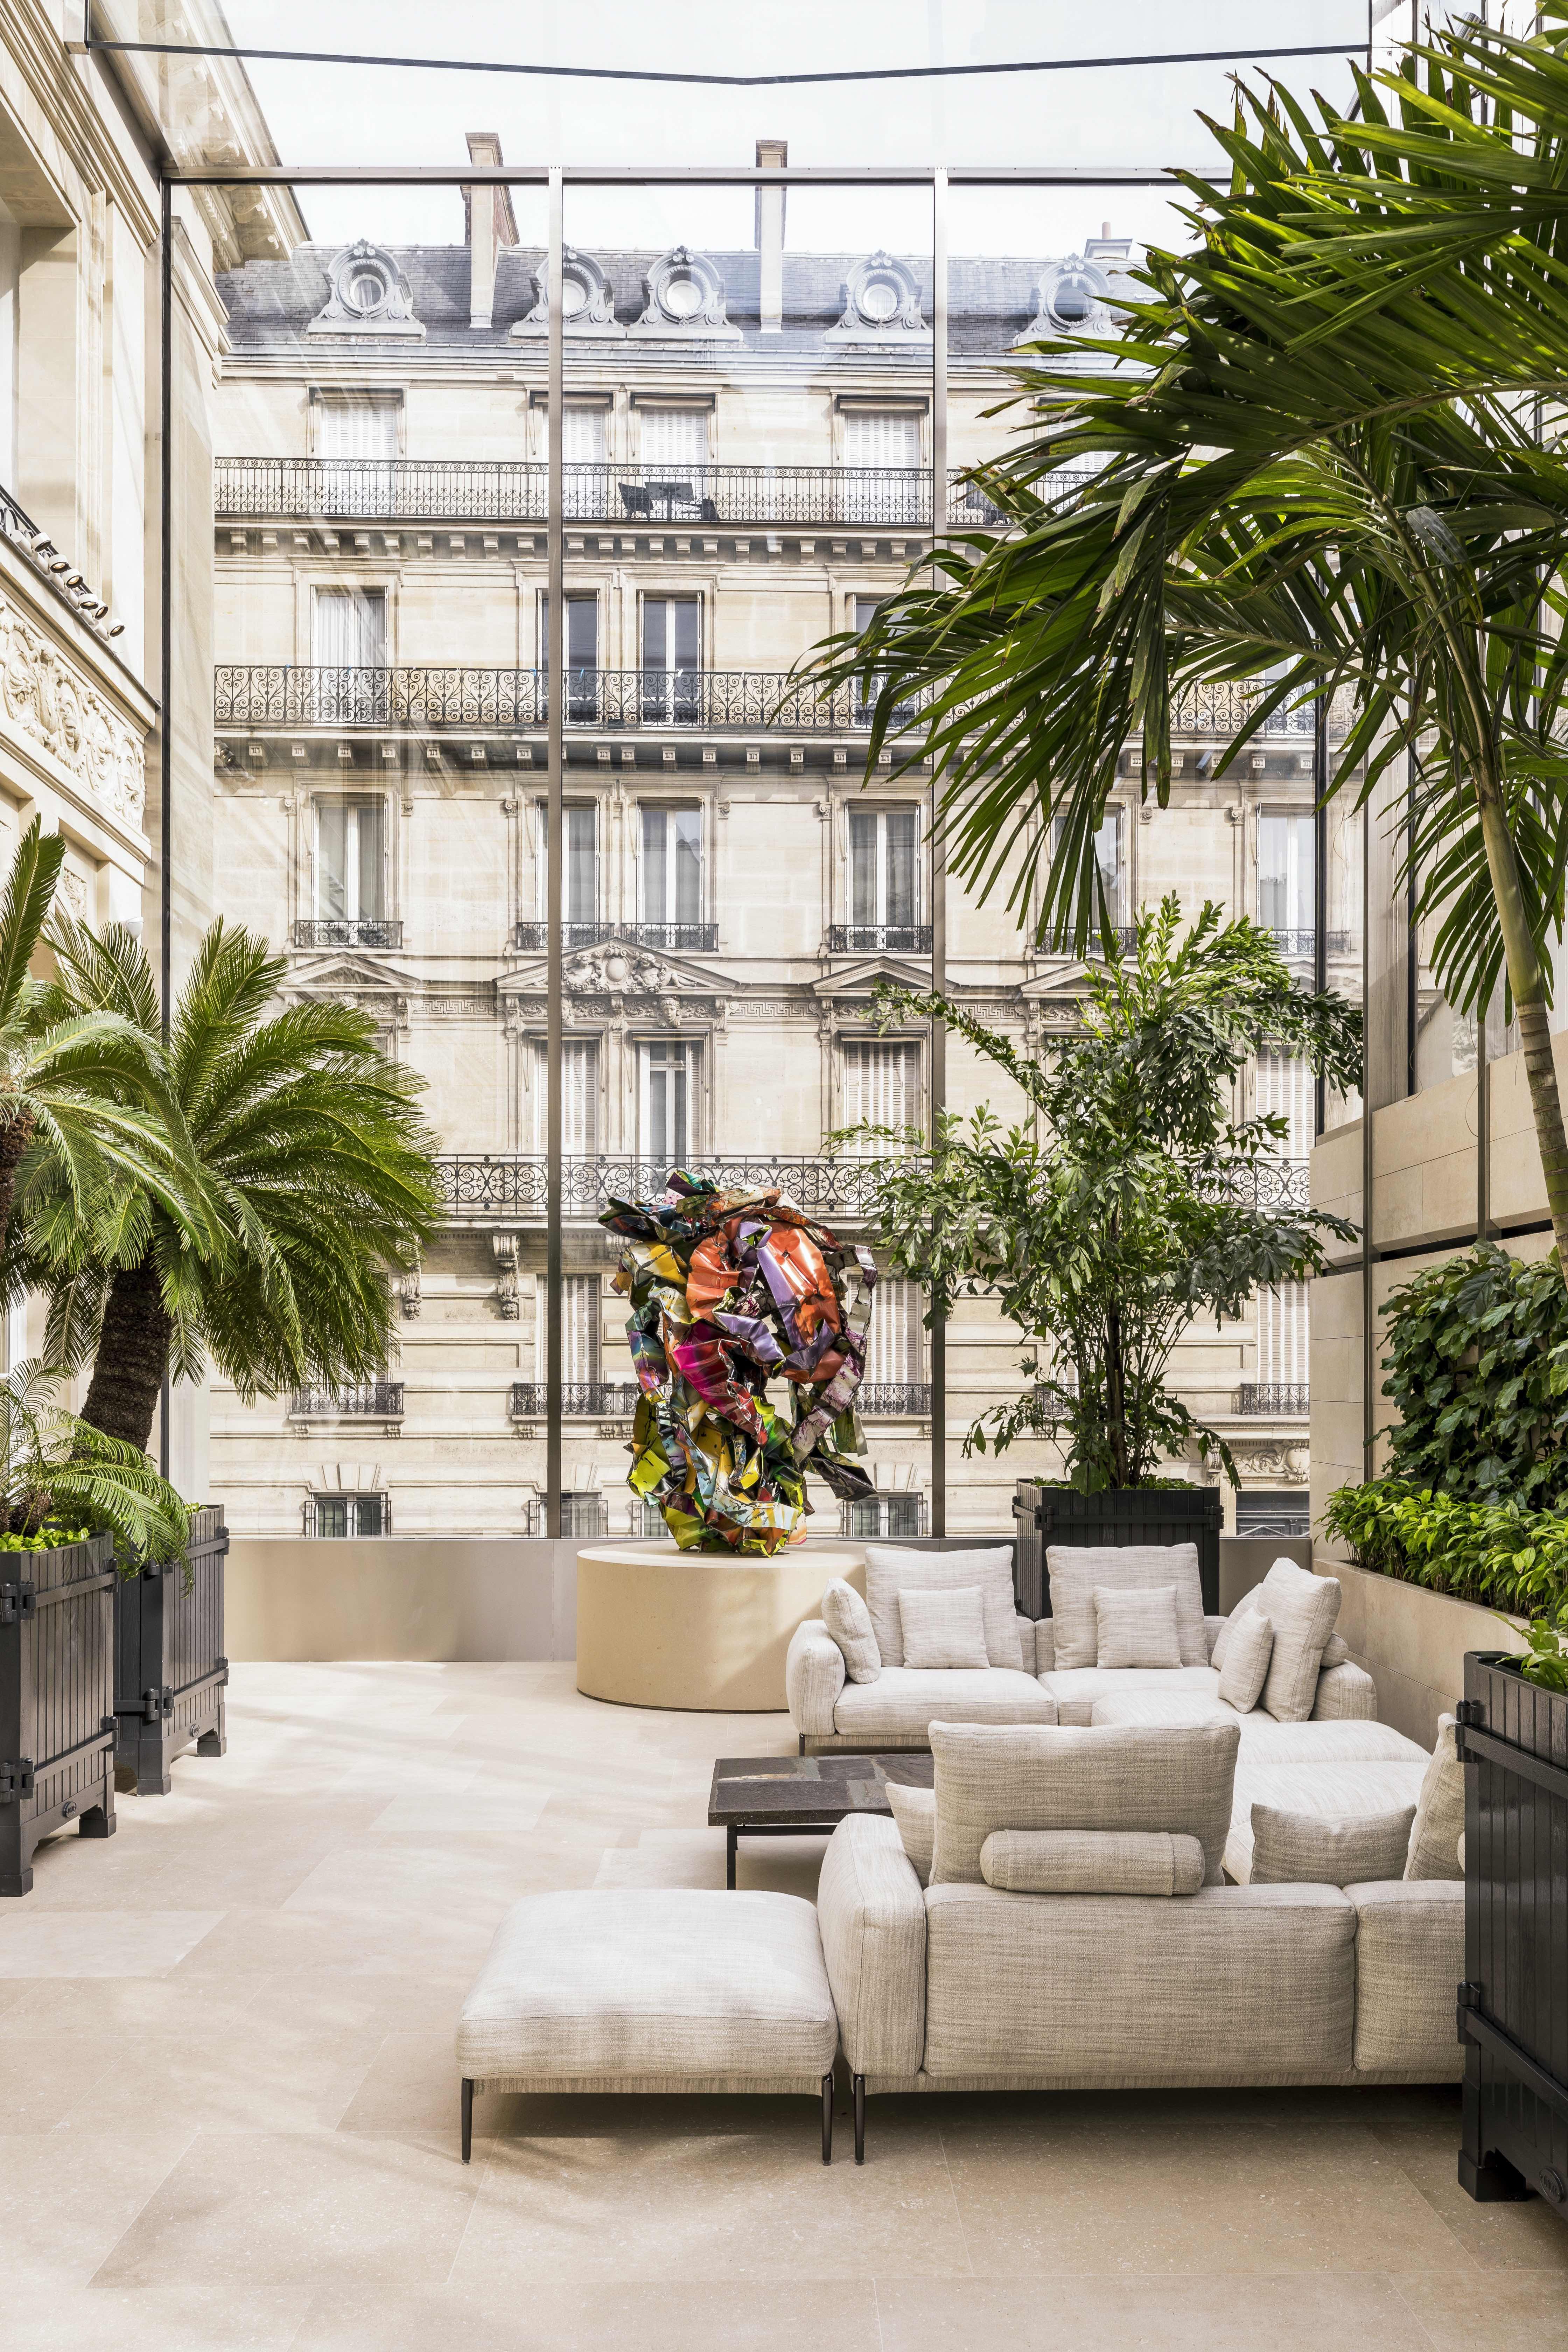 Take a Look Inside Dior's Newly Renovated Flagship in Paris